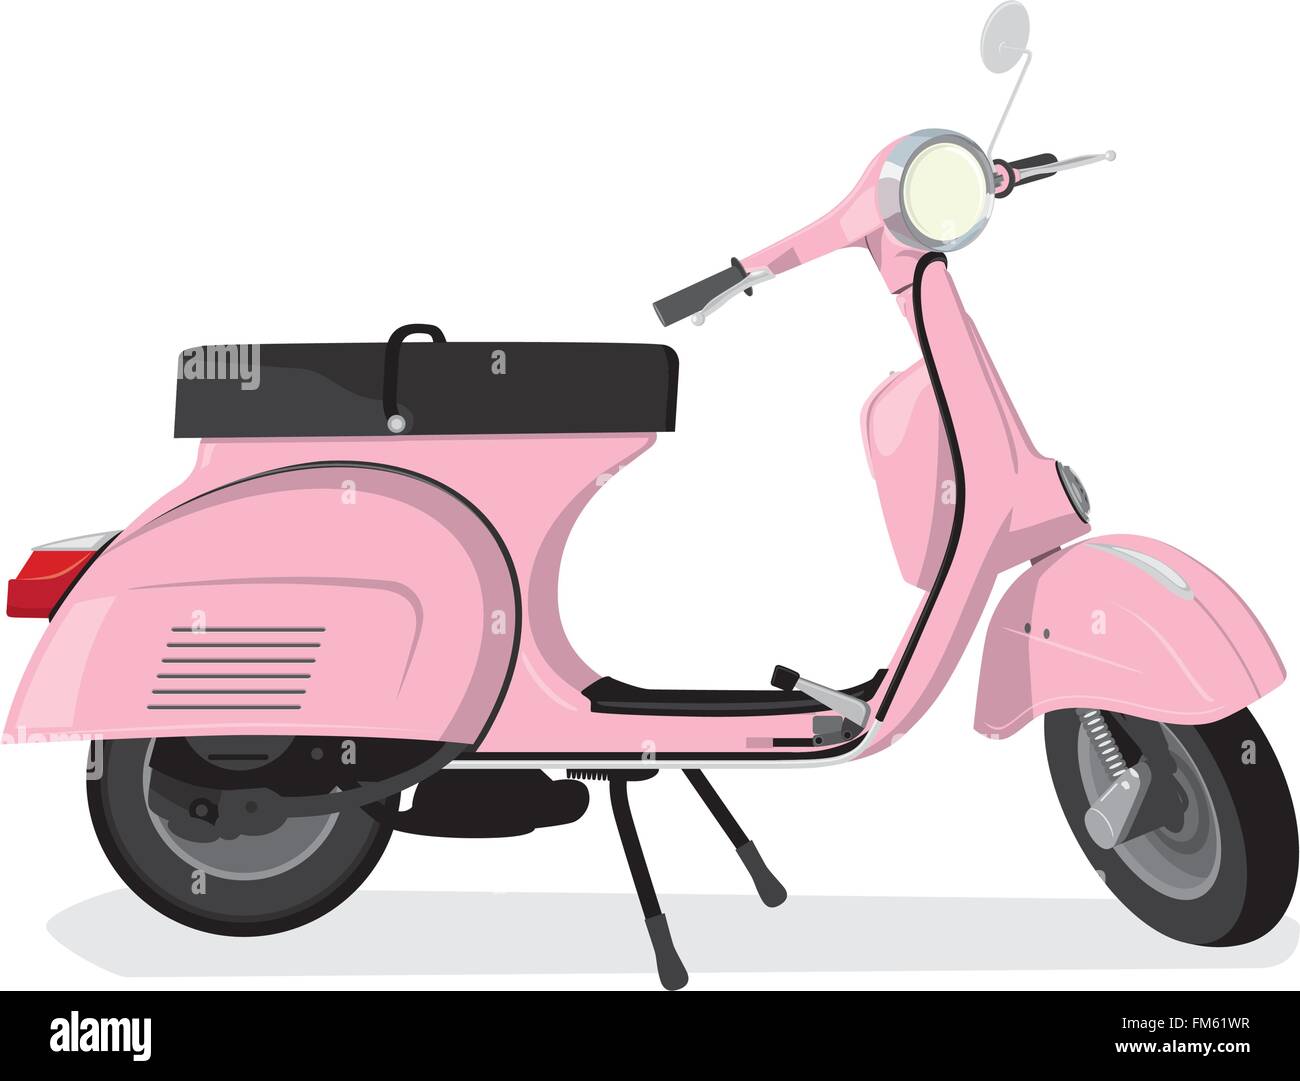 Vintage motor scooter Stock Vector